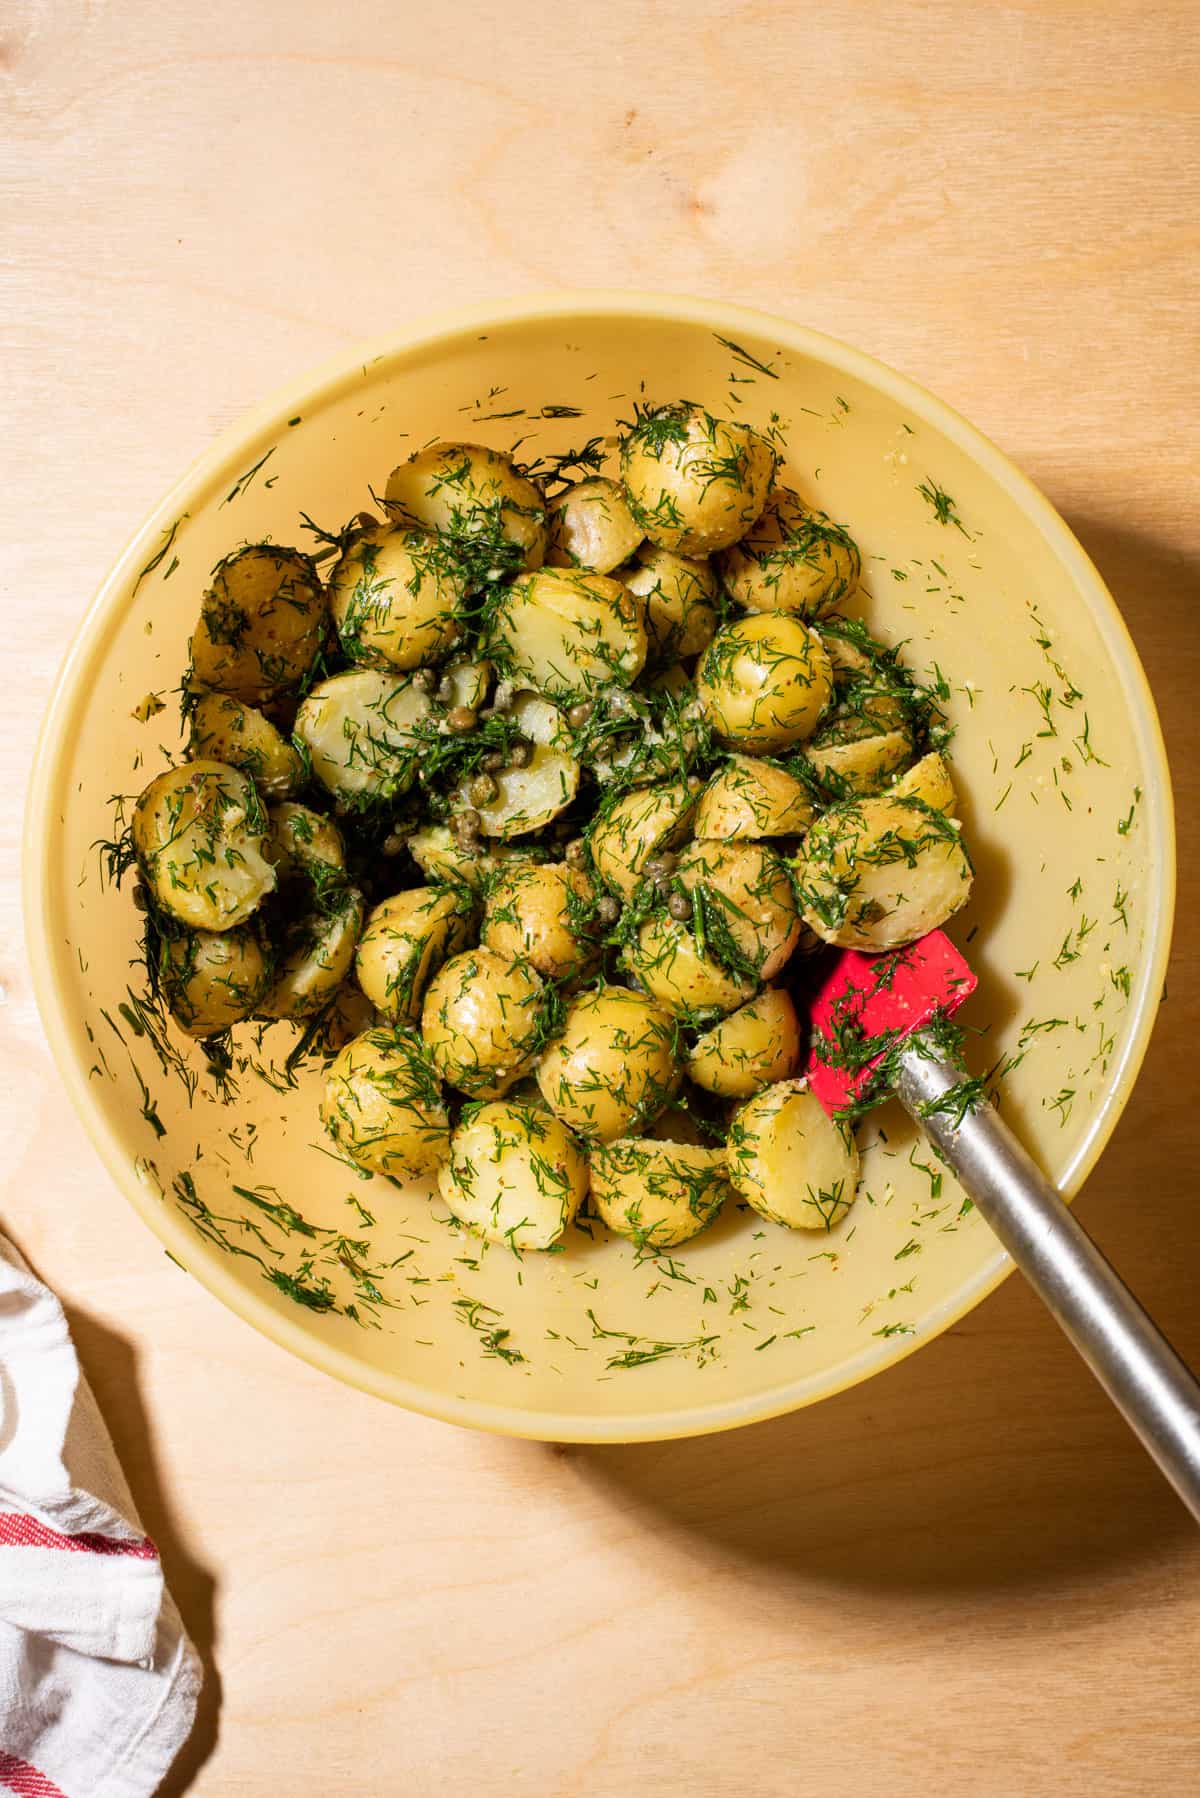 Boiled baby potatoes tossed with dill, olive oil, and capers.